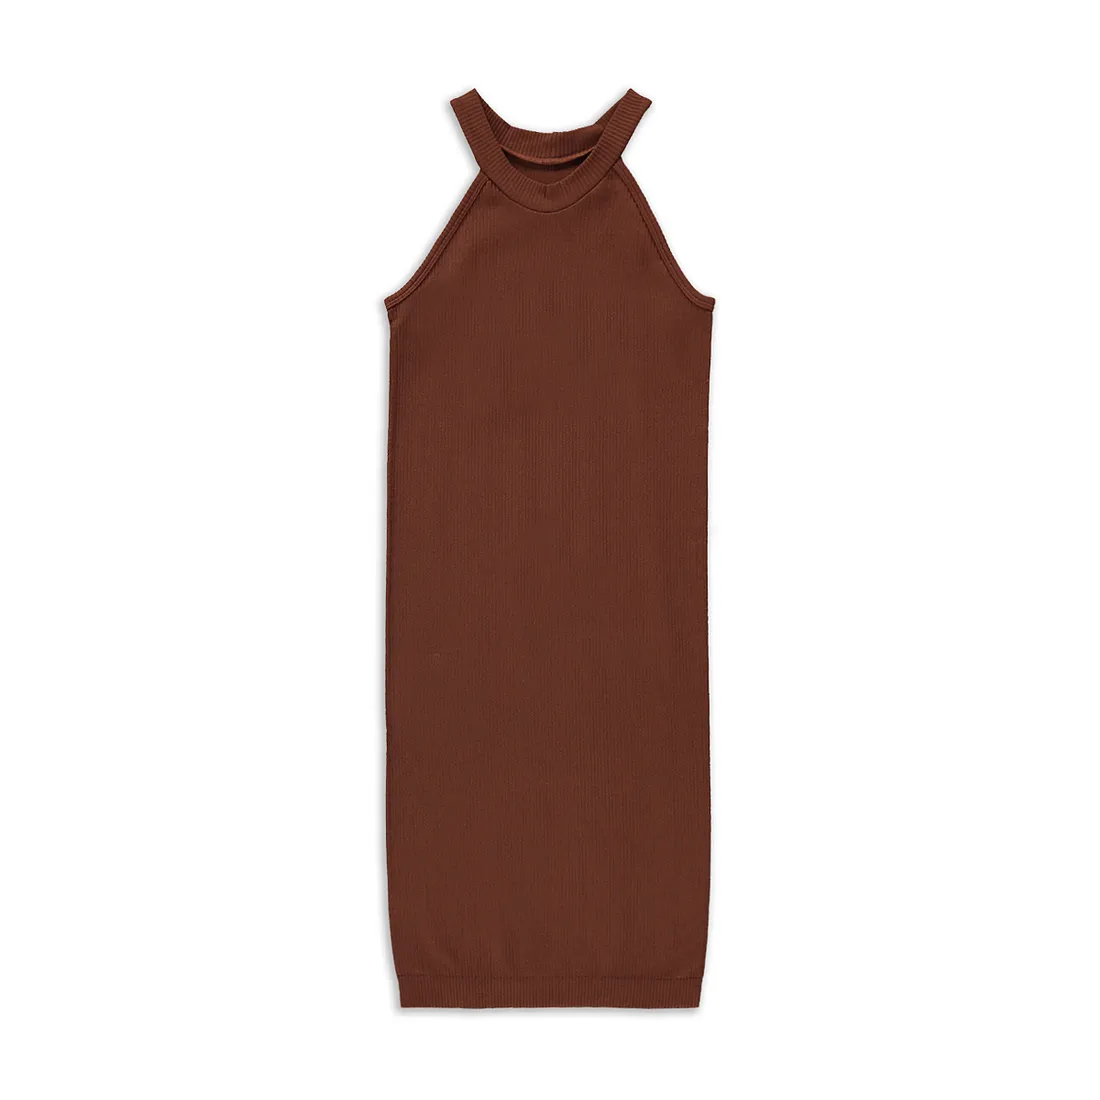 Seamless bodycon dress brown - GIRLS 7-15 YEARS Dresses & Jumpsuits ...